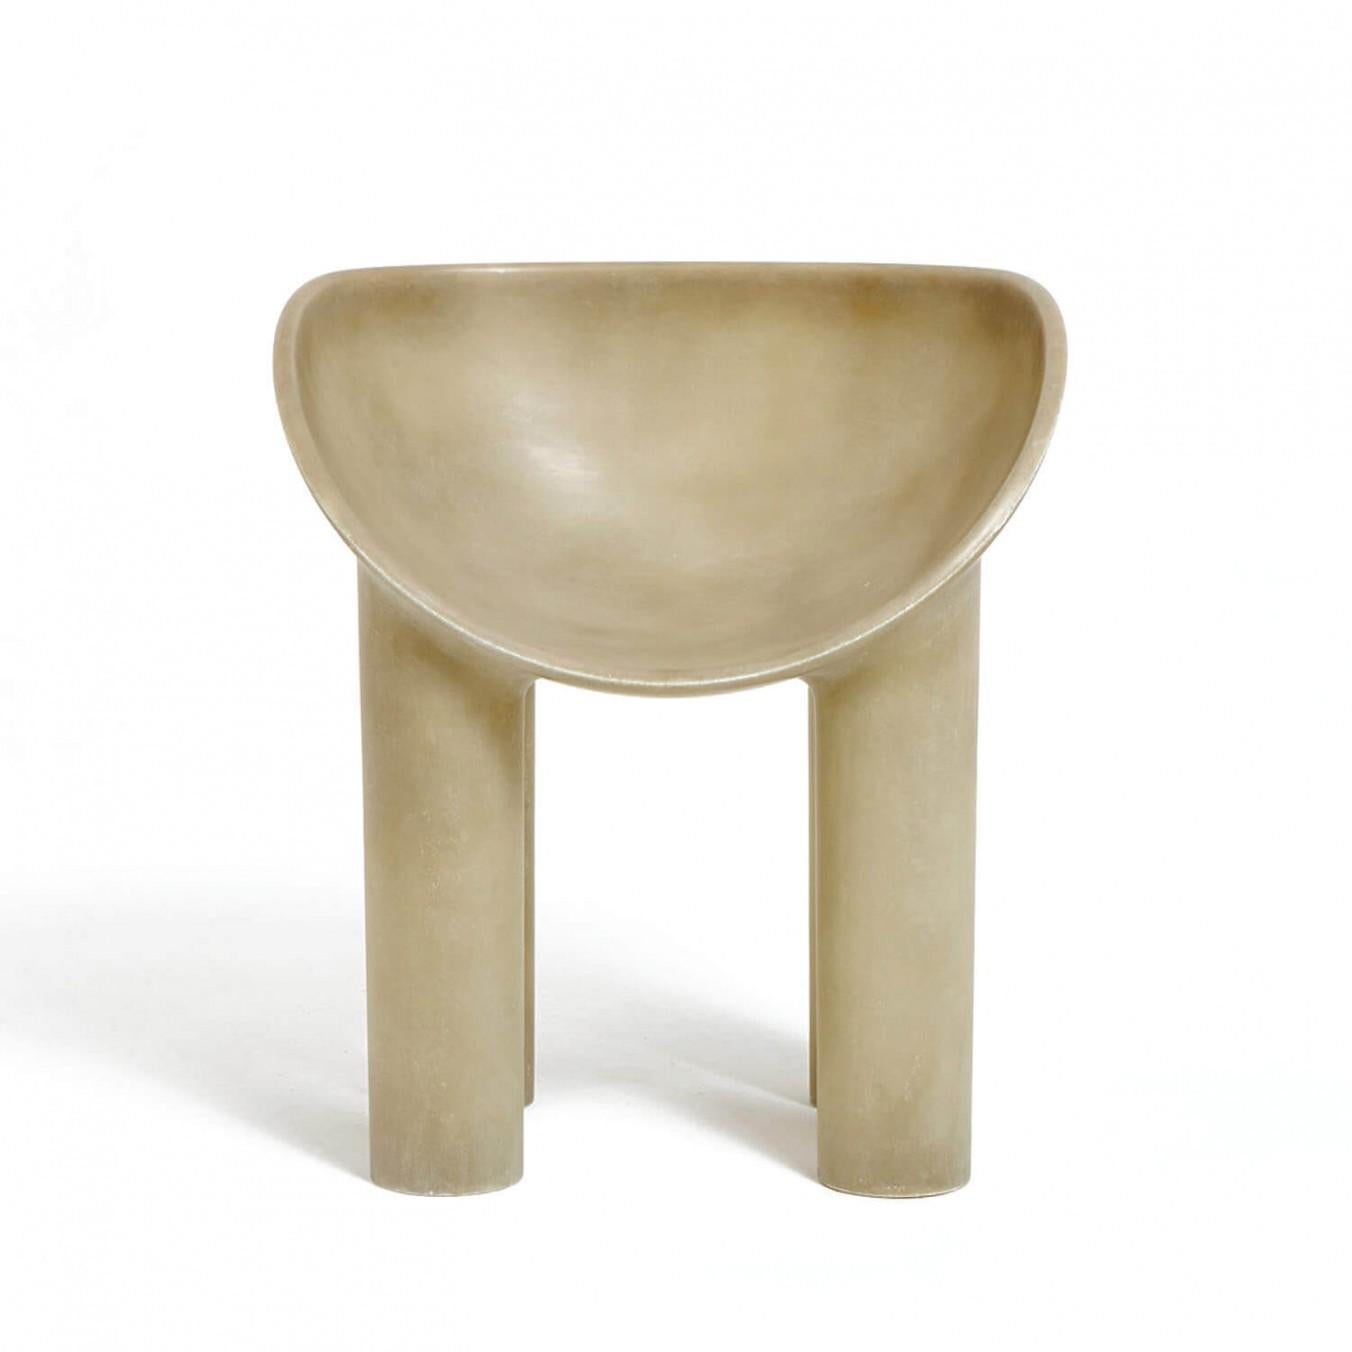 Contemporary Cream Fiberglass Chair, Roly-Poly Dining Chair by Faye Toogood In New Condition For Sale In Warsaw, PL